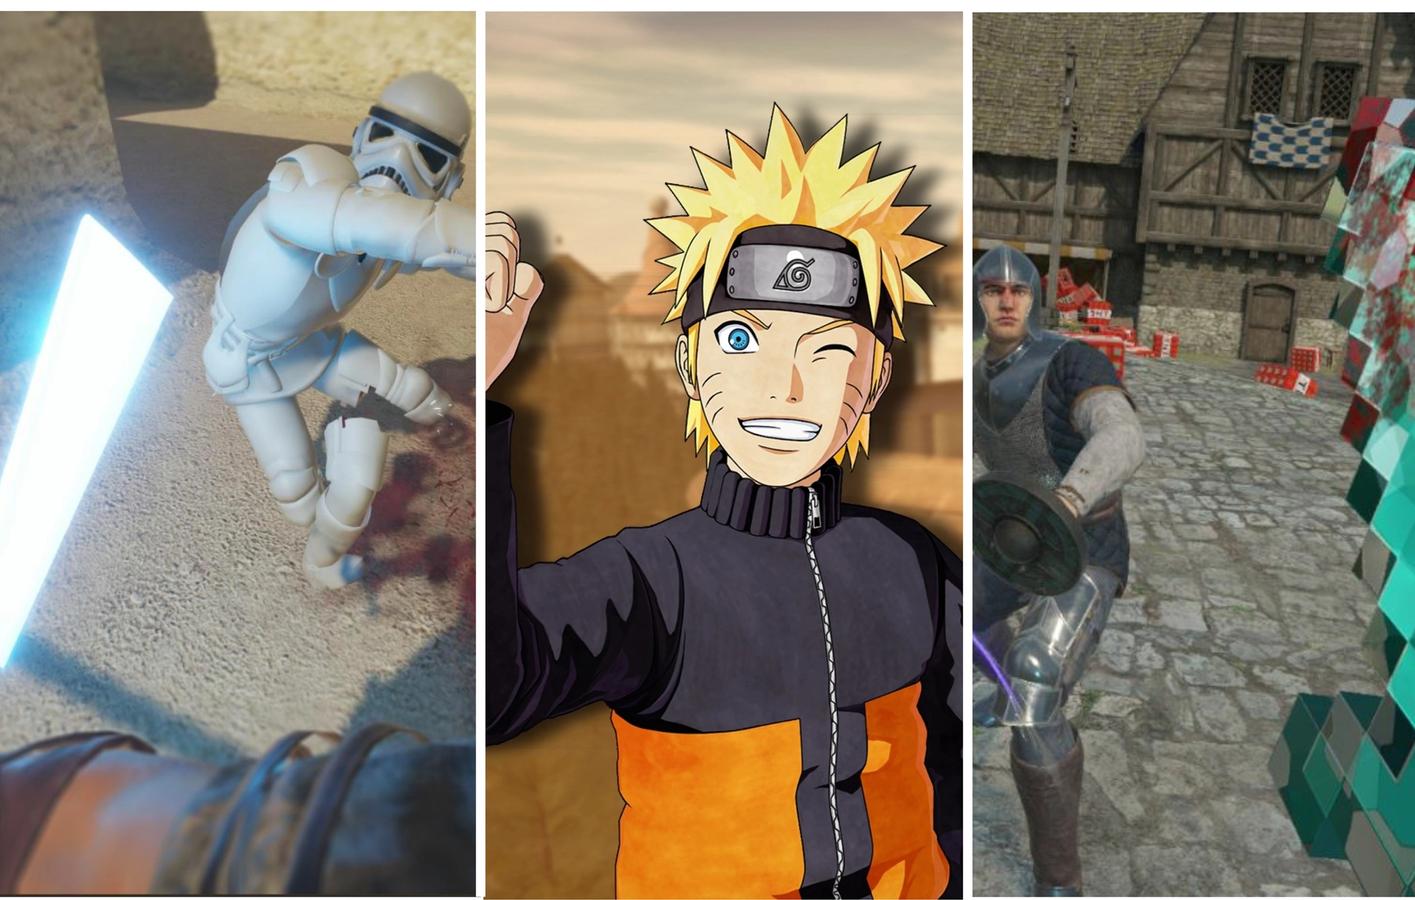 A stormtrooper, Naruto and a medieval villager all together, for perhaps the first time in history.